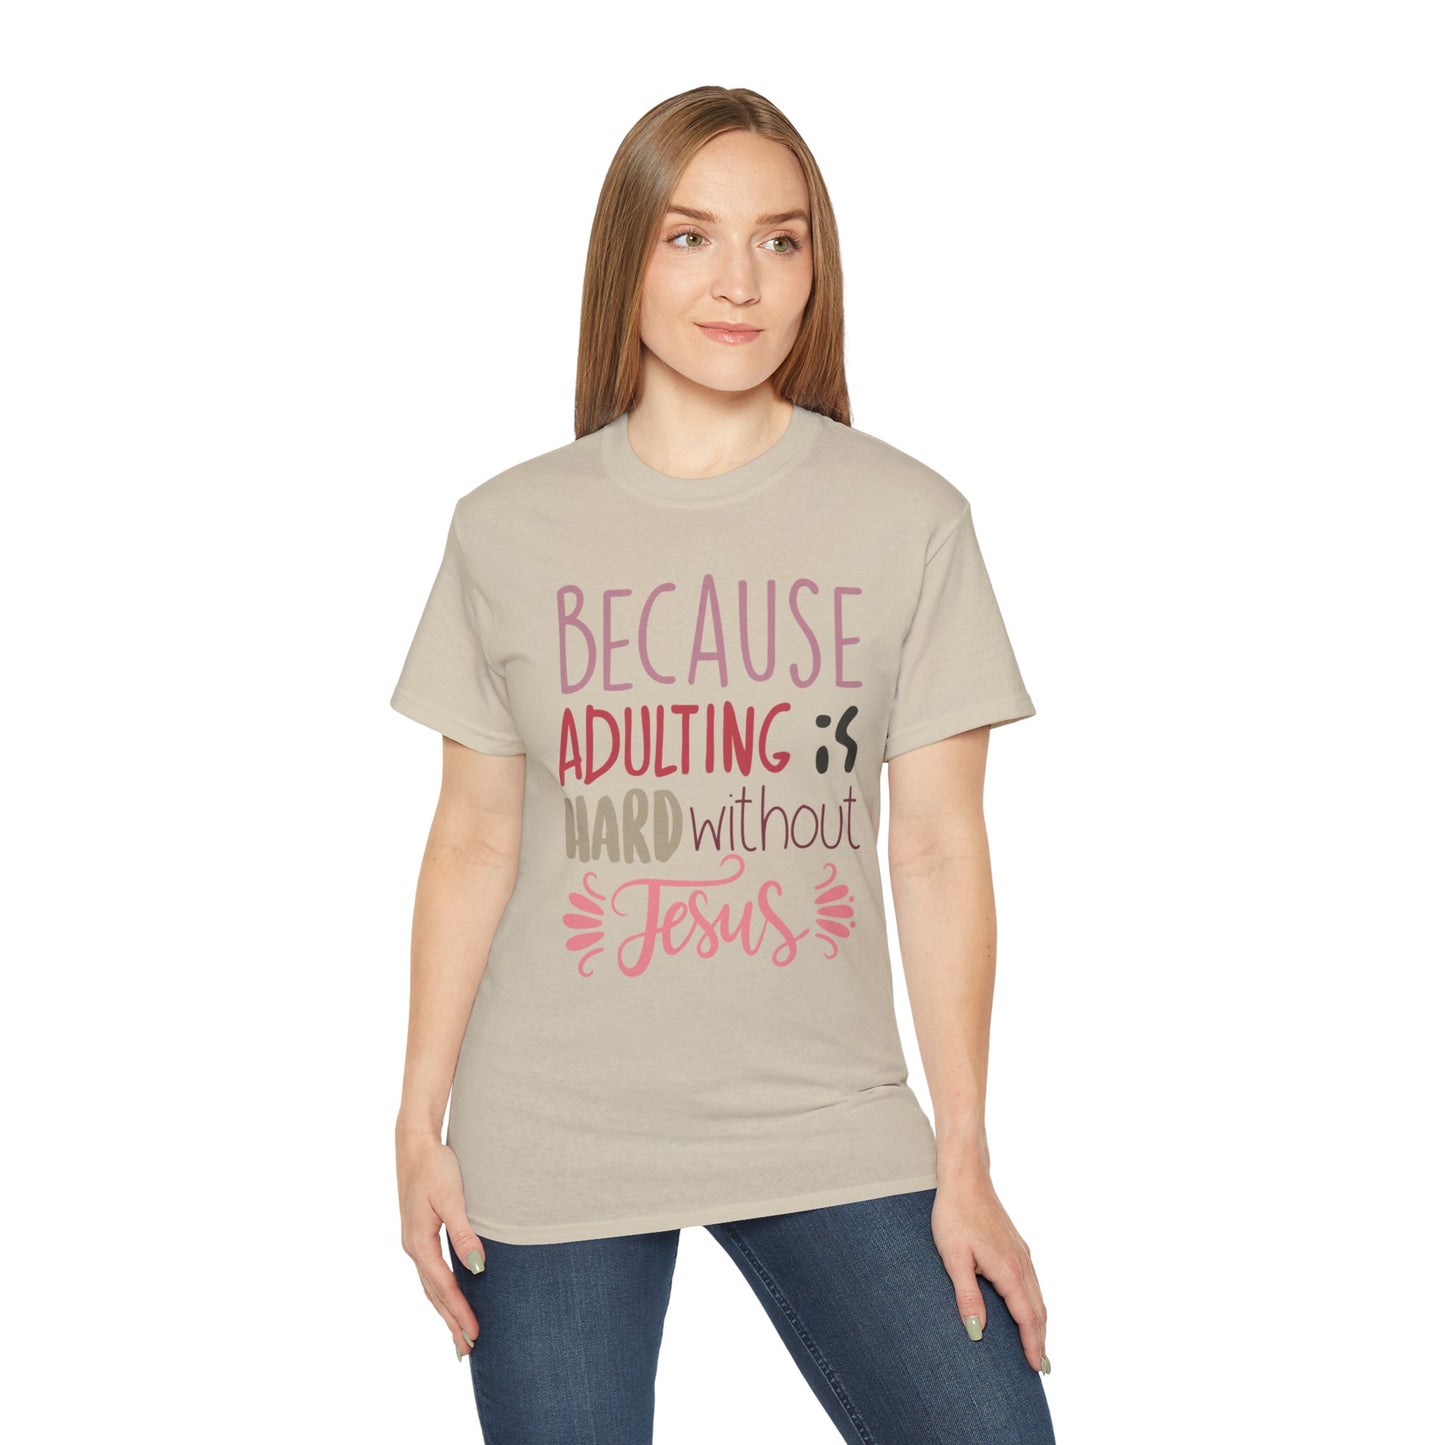 woman in sand colored shirt with words "Because Adulting is Hard without Jesus"